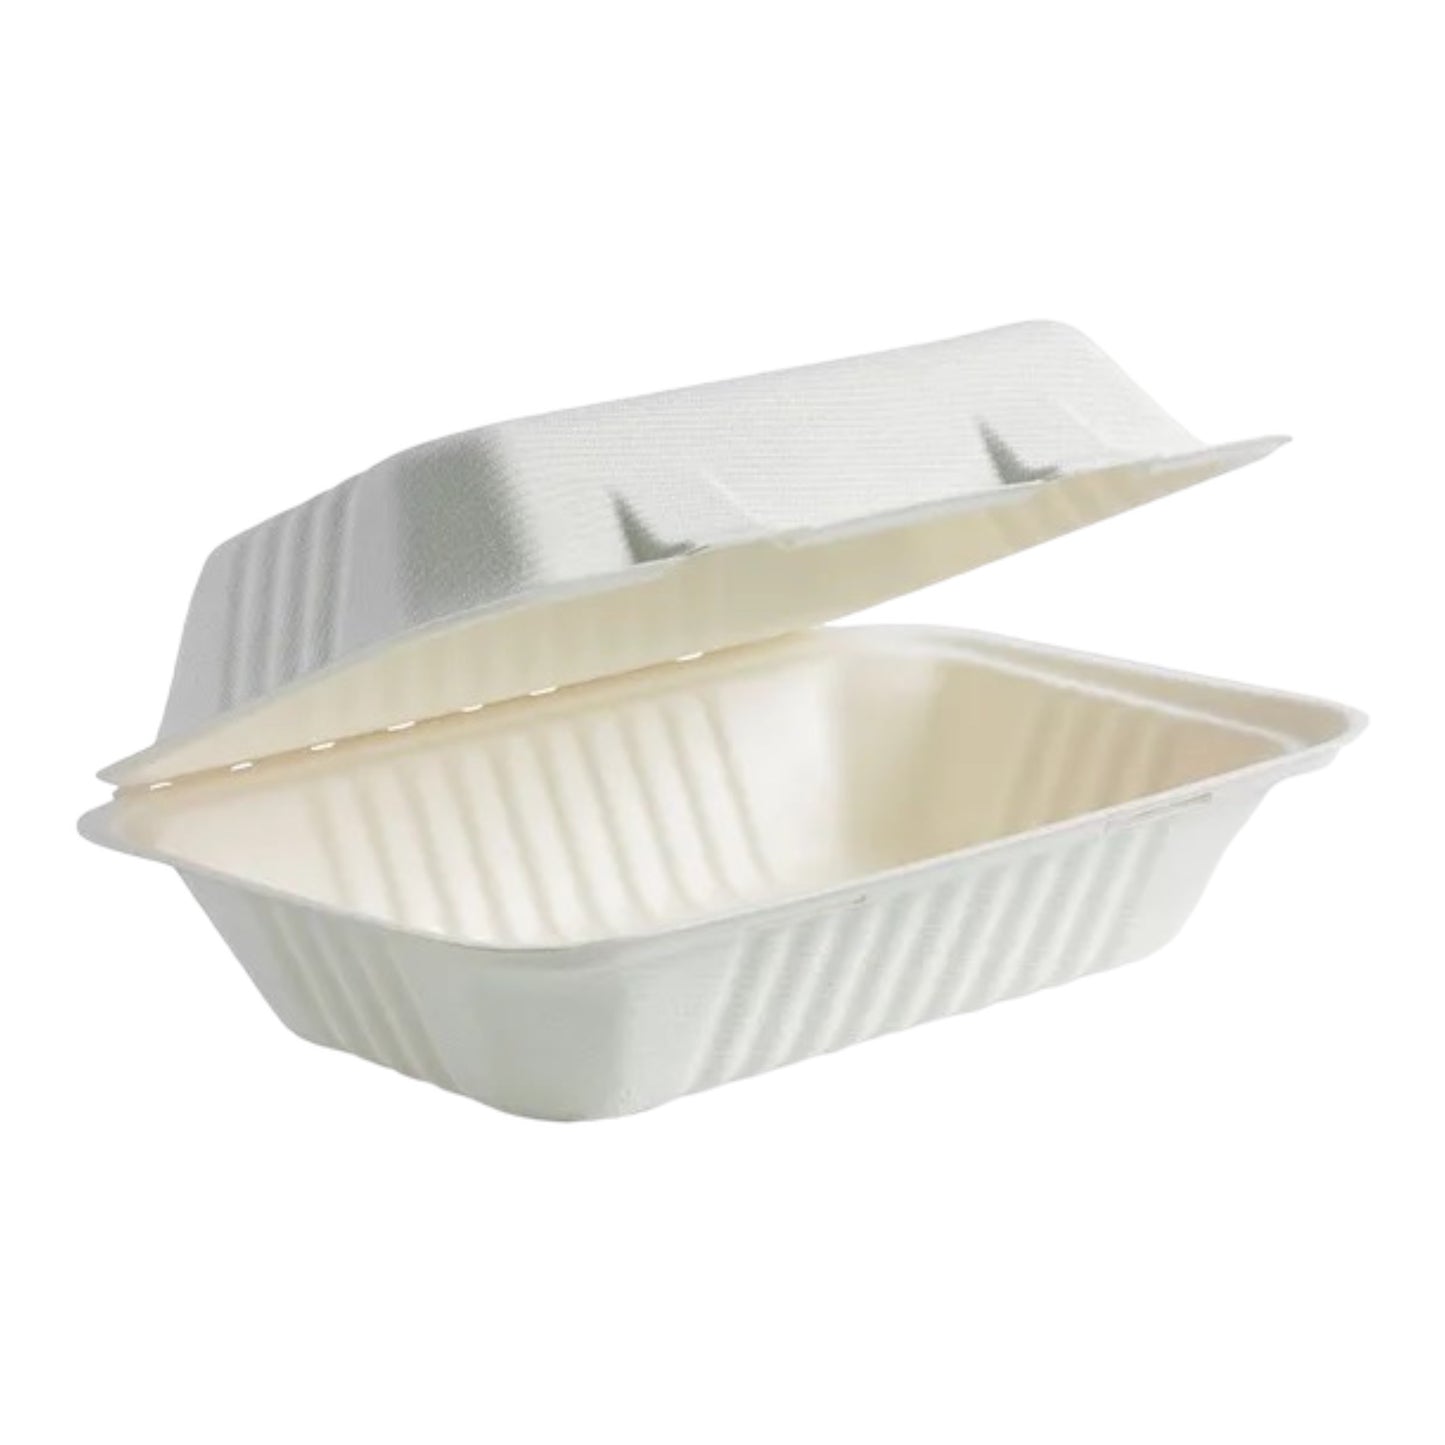 9x6x3 Bagasse Lunch Box Clamshell